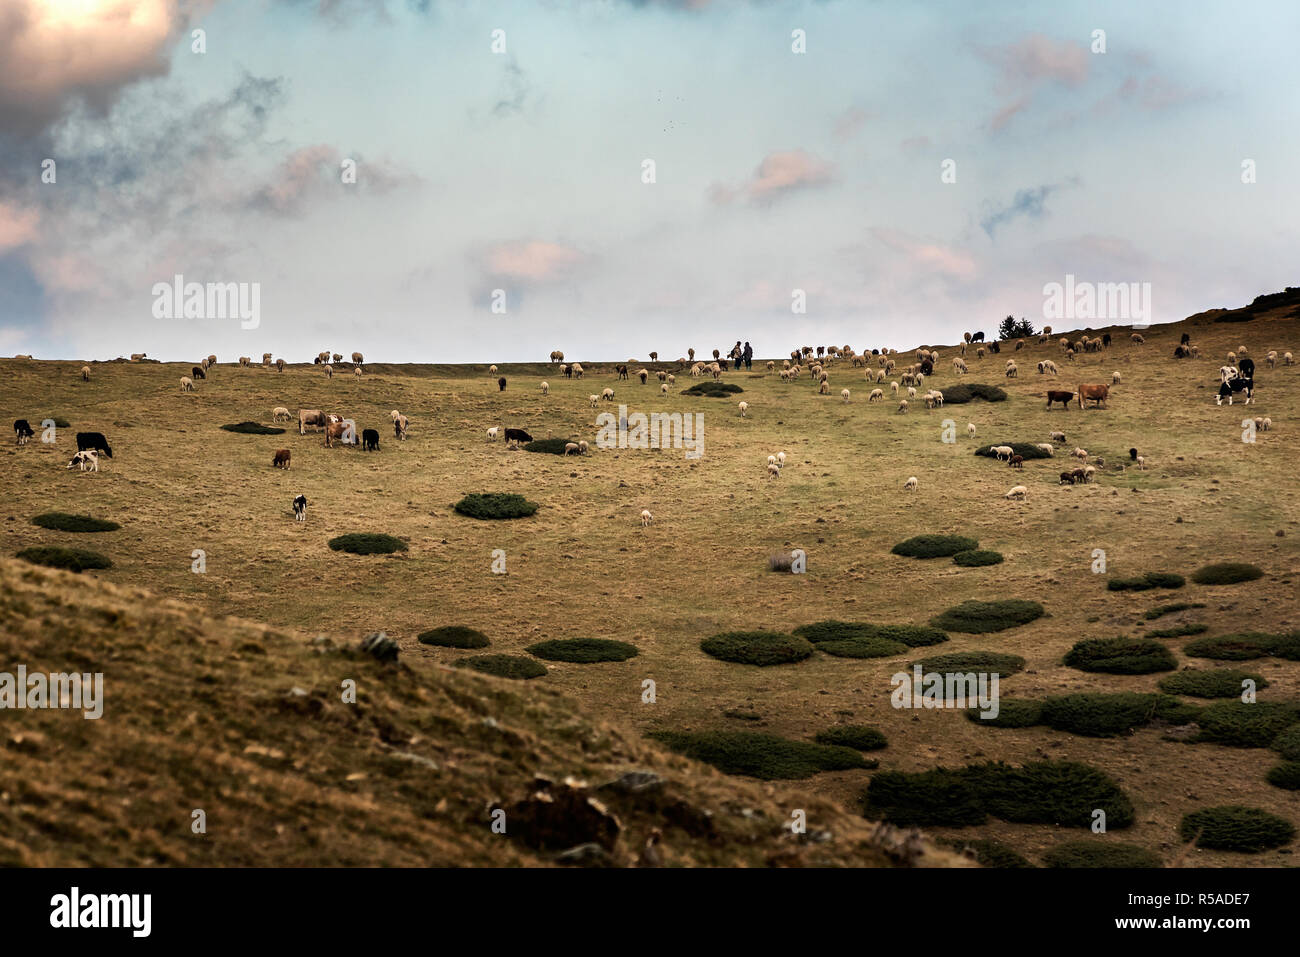 Sar Mountains, Sar Planina, Macedonia - Mixed Herd of Sheep and Cattle grazing on  under the Cloudy Sky Stock Photo